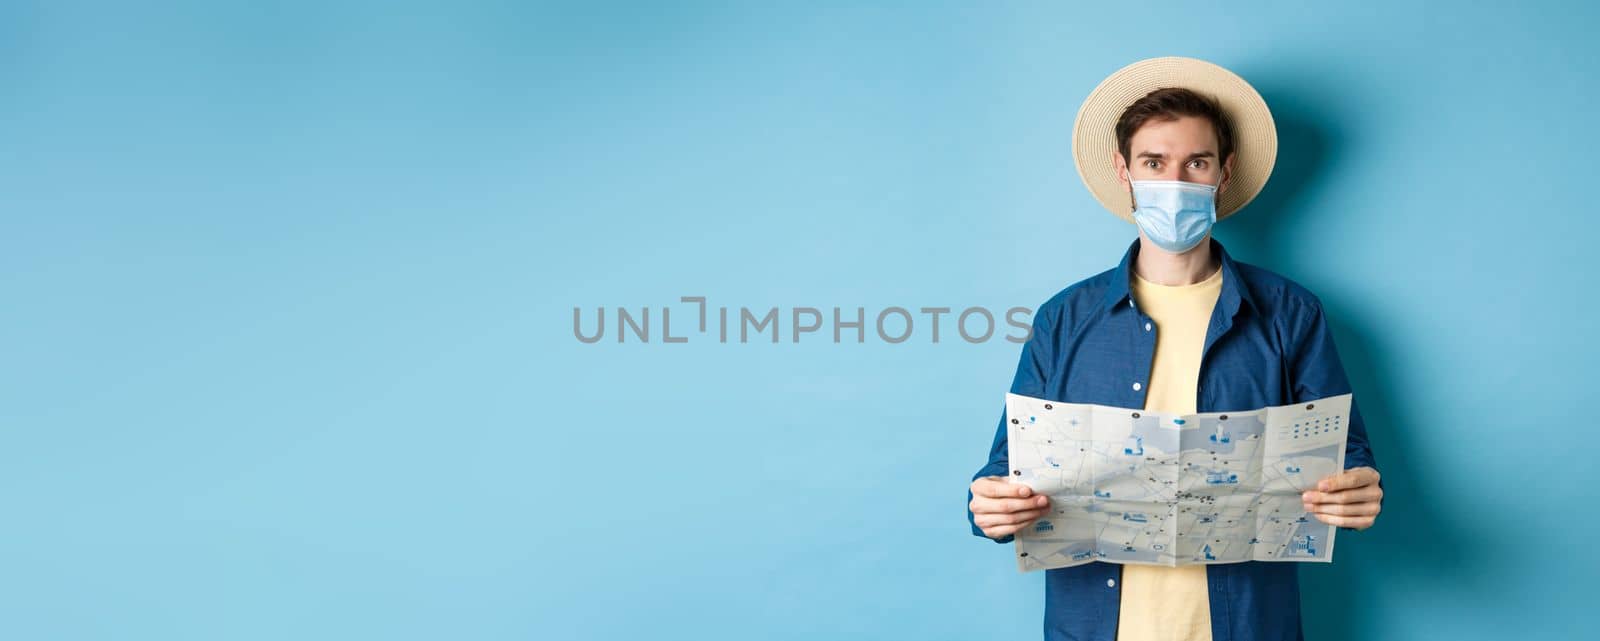 Covid-19, pandemic and travel concept. Happy tourist on summer vacation wearing medical mask and straw hat, holding road map, standing on blue background.